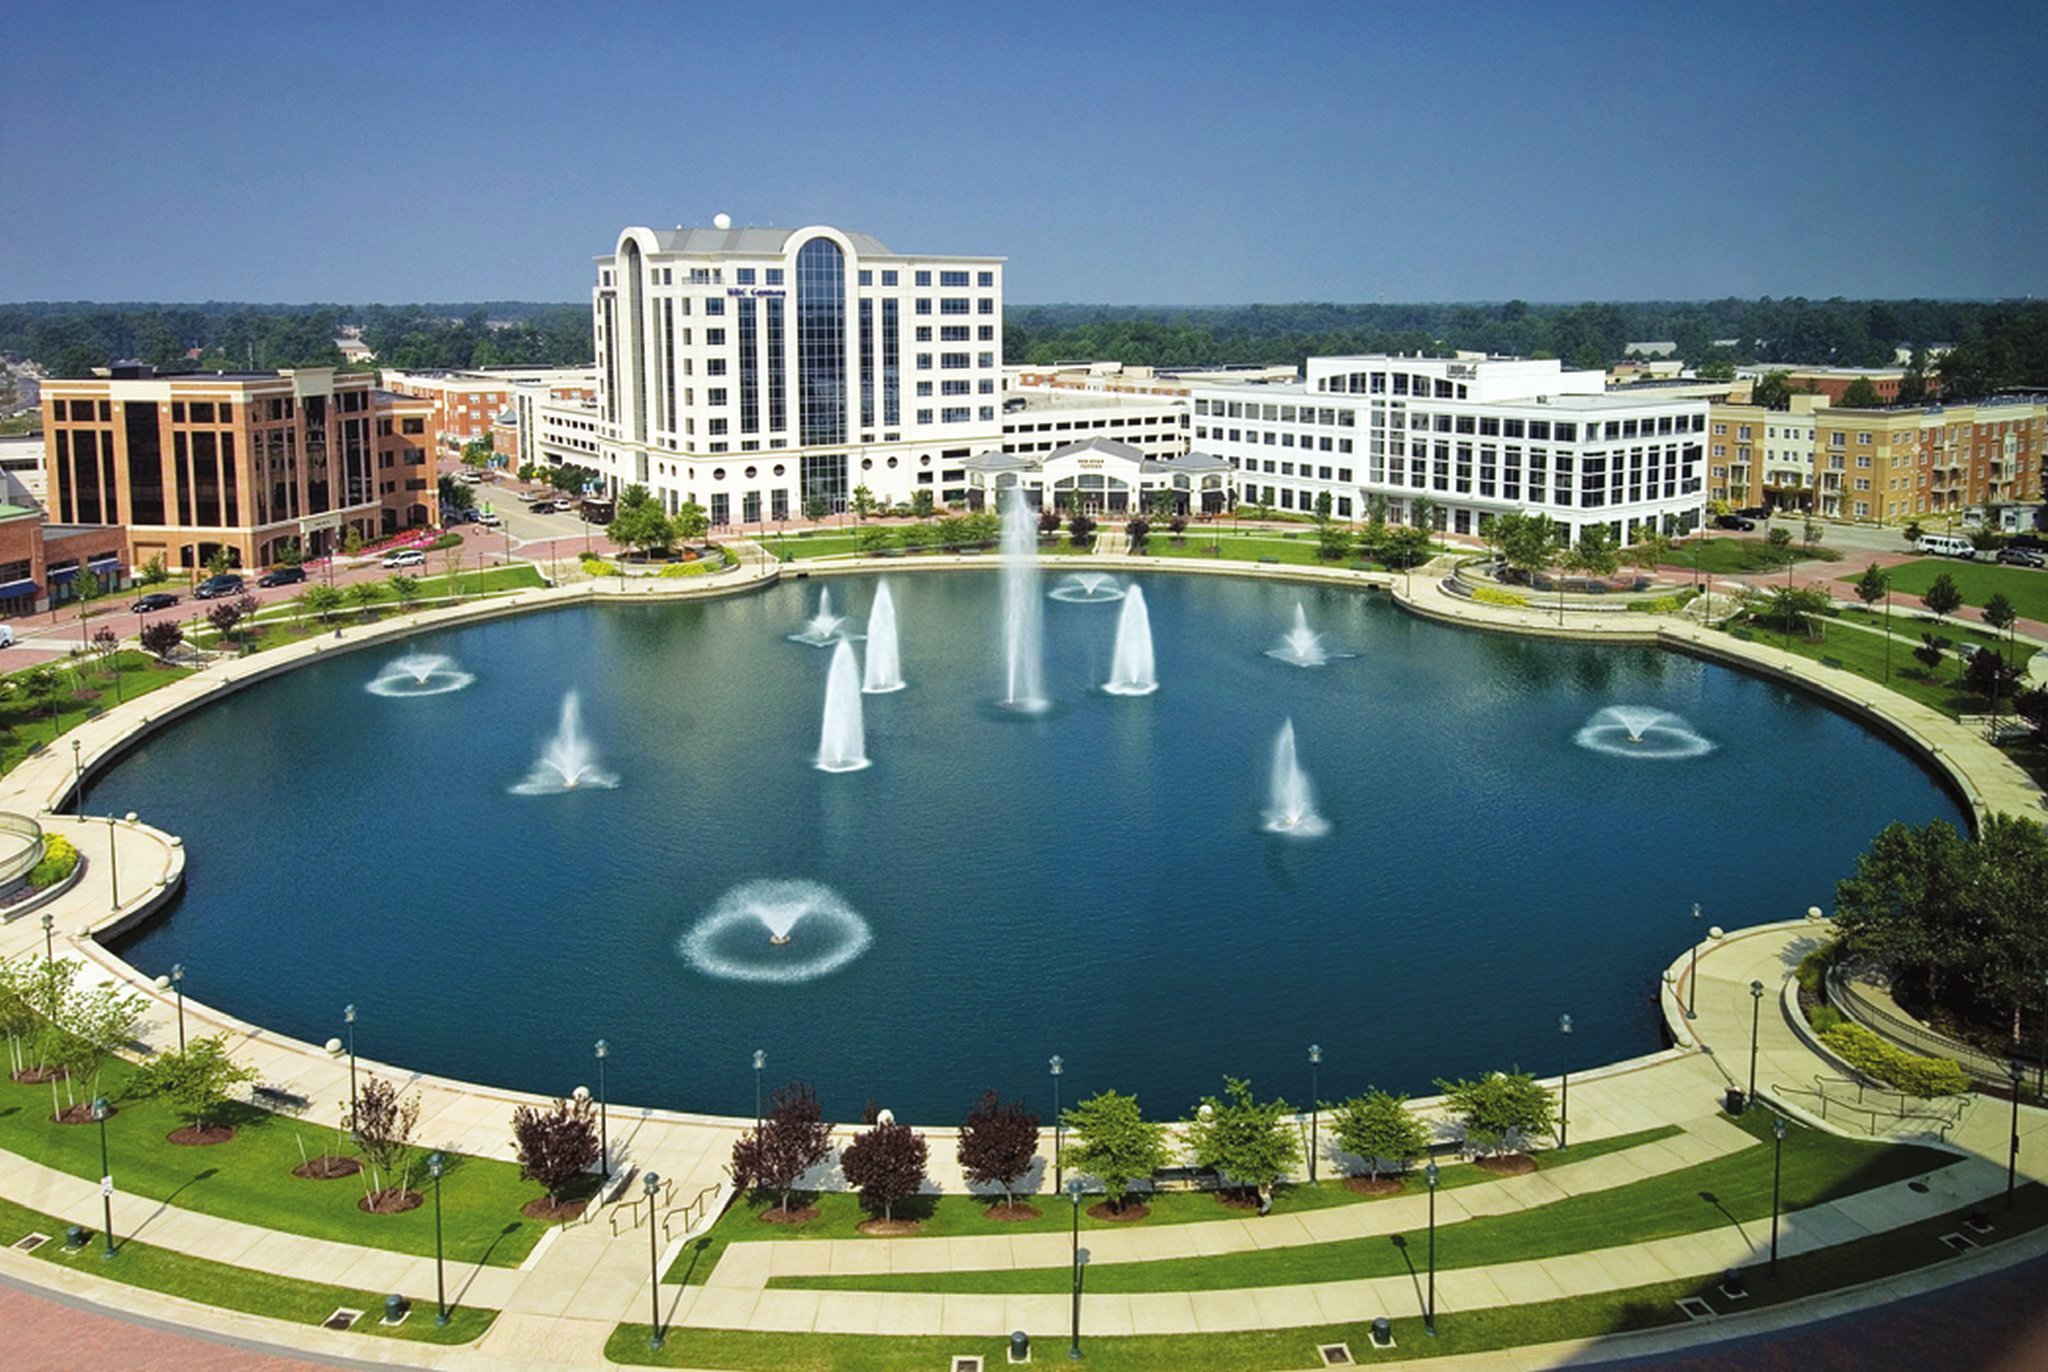 photograph of a luxurious Newport News hotel or conference center, with tall buildings rising behind an artificial lake sporting fountains